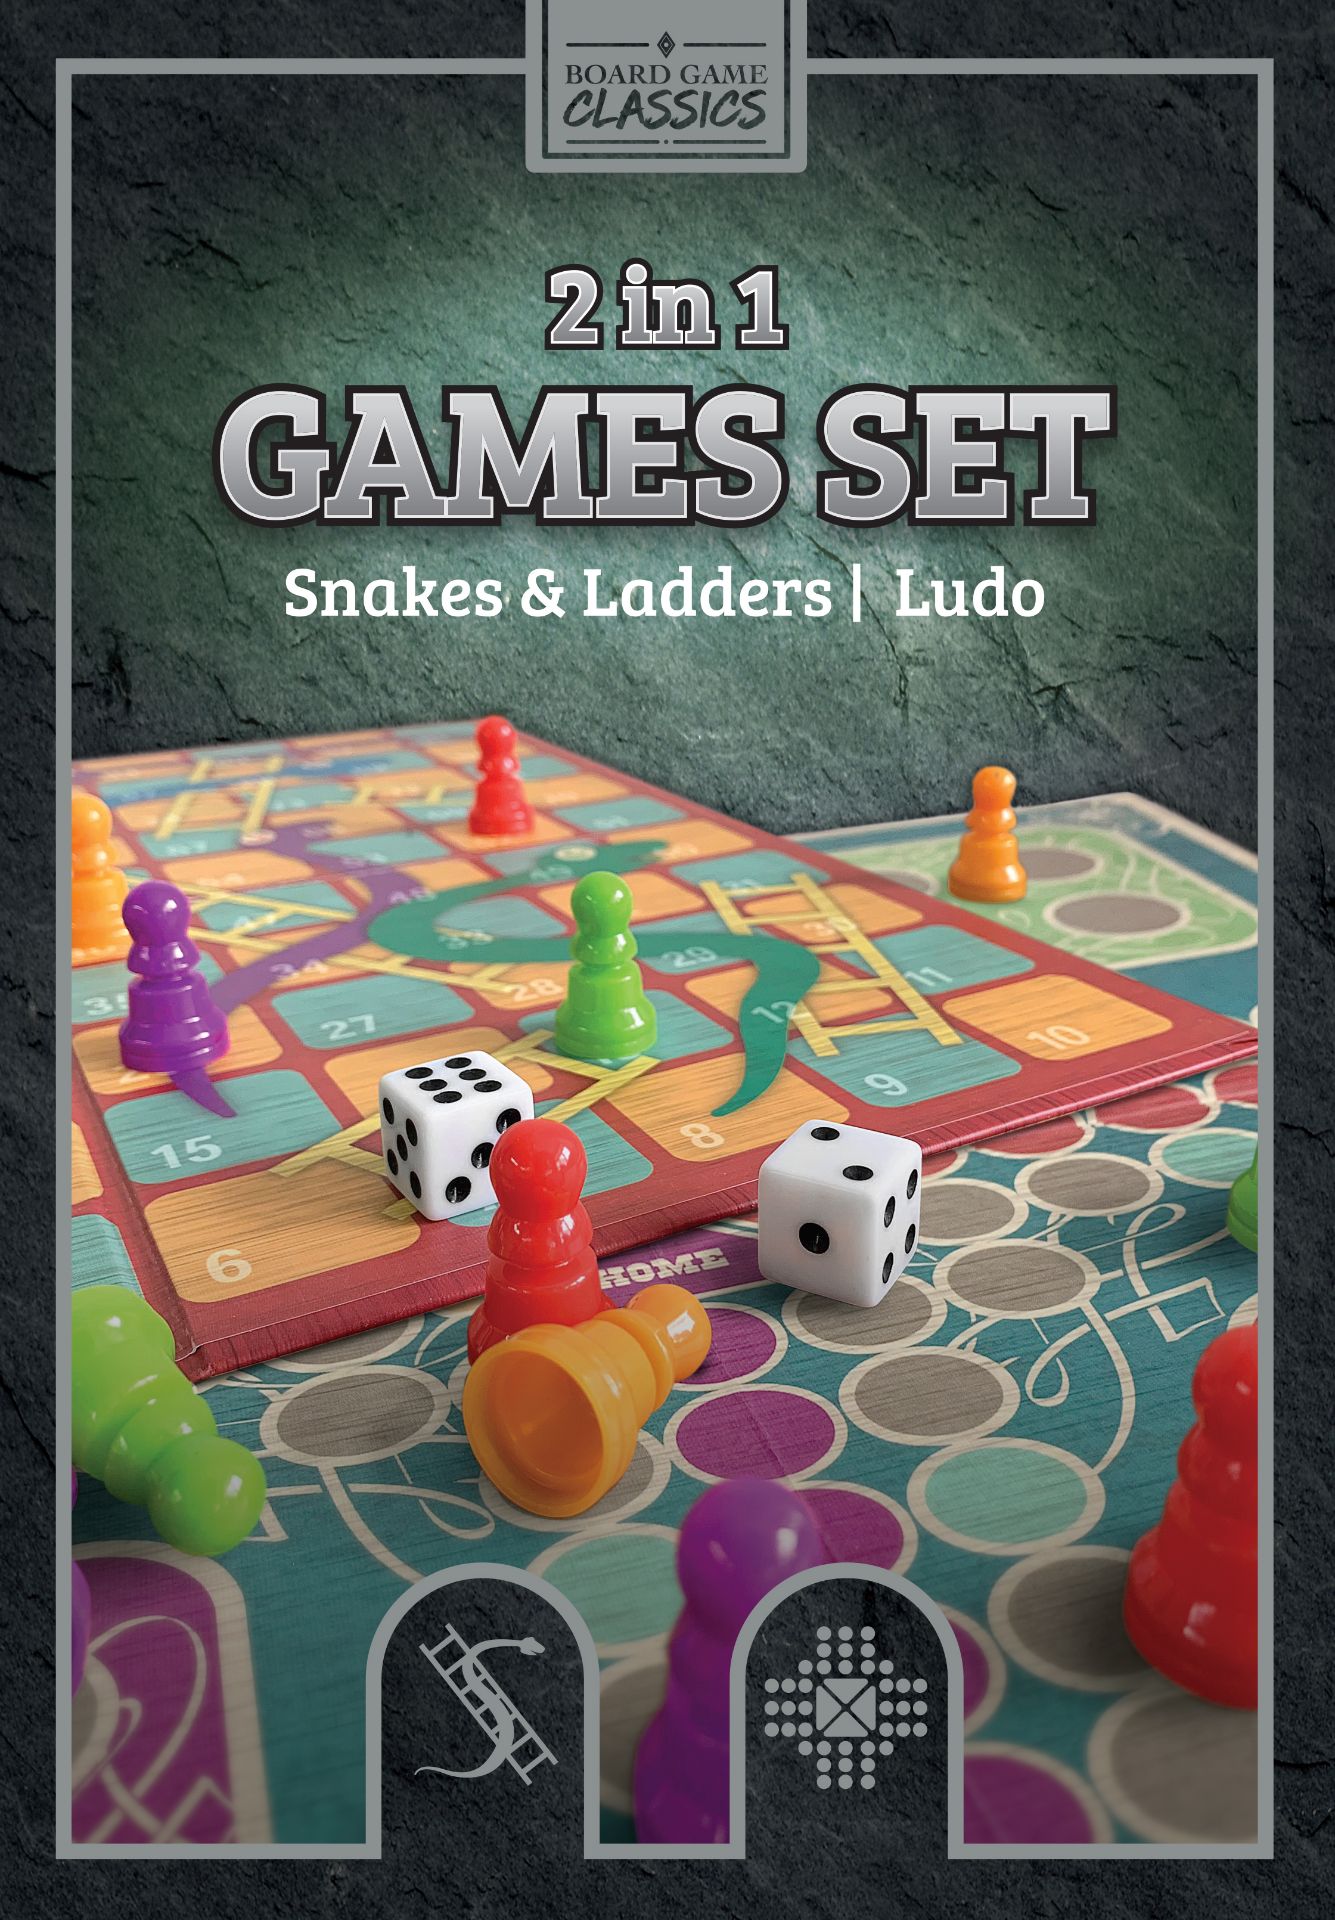 New 2 in 1 Games Set - Snakes & Ladders, Ludo